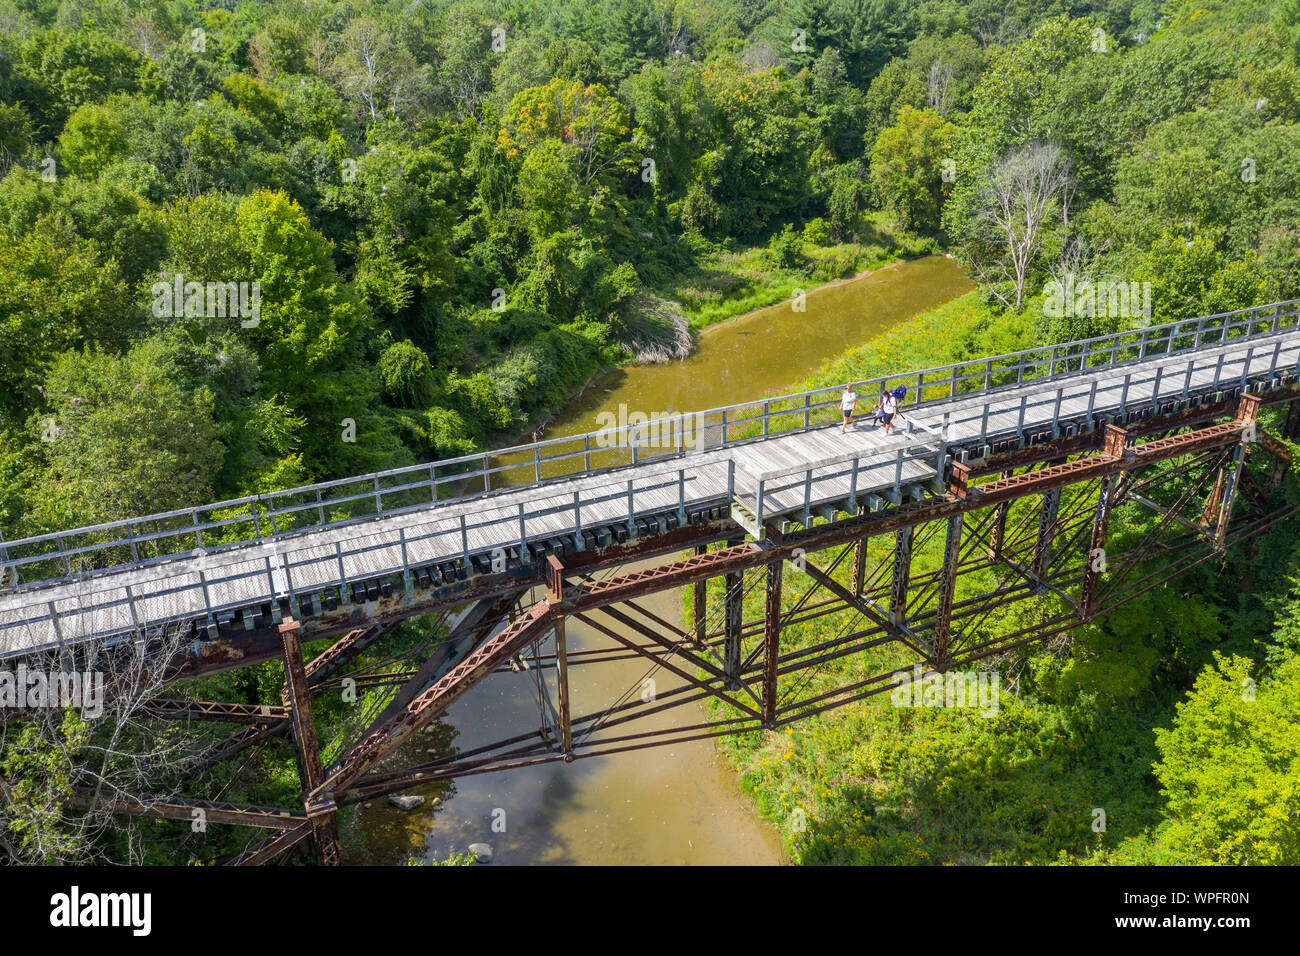 Avoca, Michigan - The 12.5-mile Wadhams to Avoca Trail, a former CSX Railway line that was converted to a hiking and bicycling trail. A 640-foot long Stock Photo